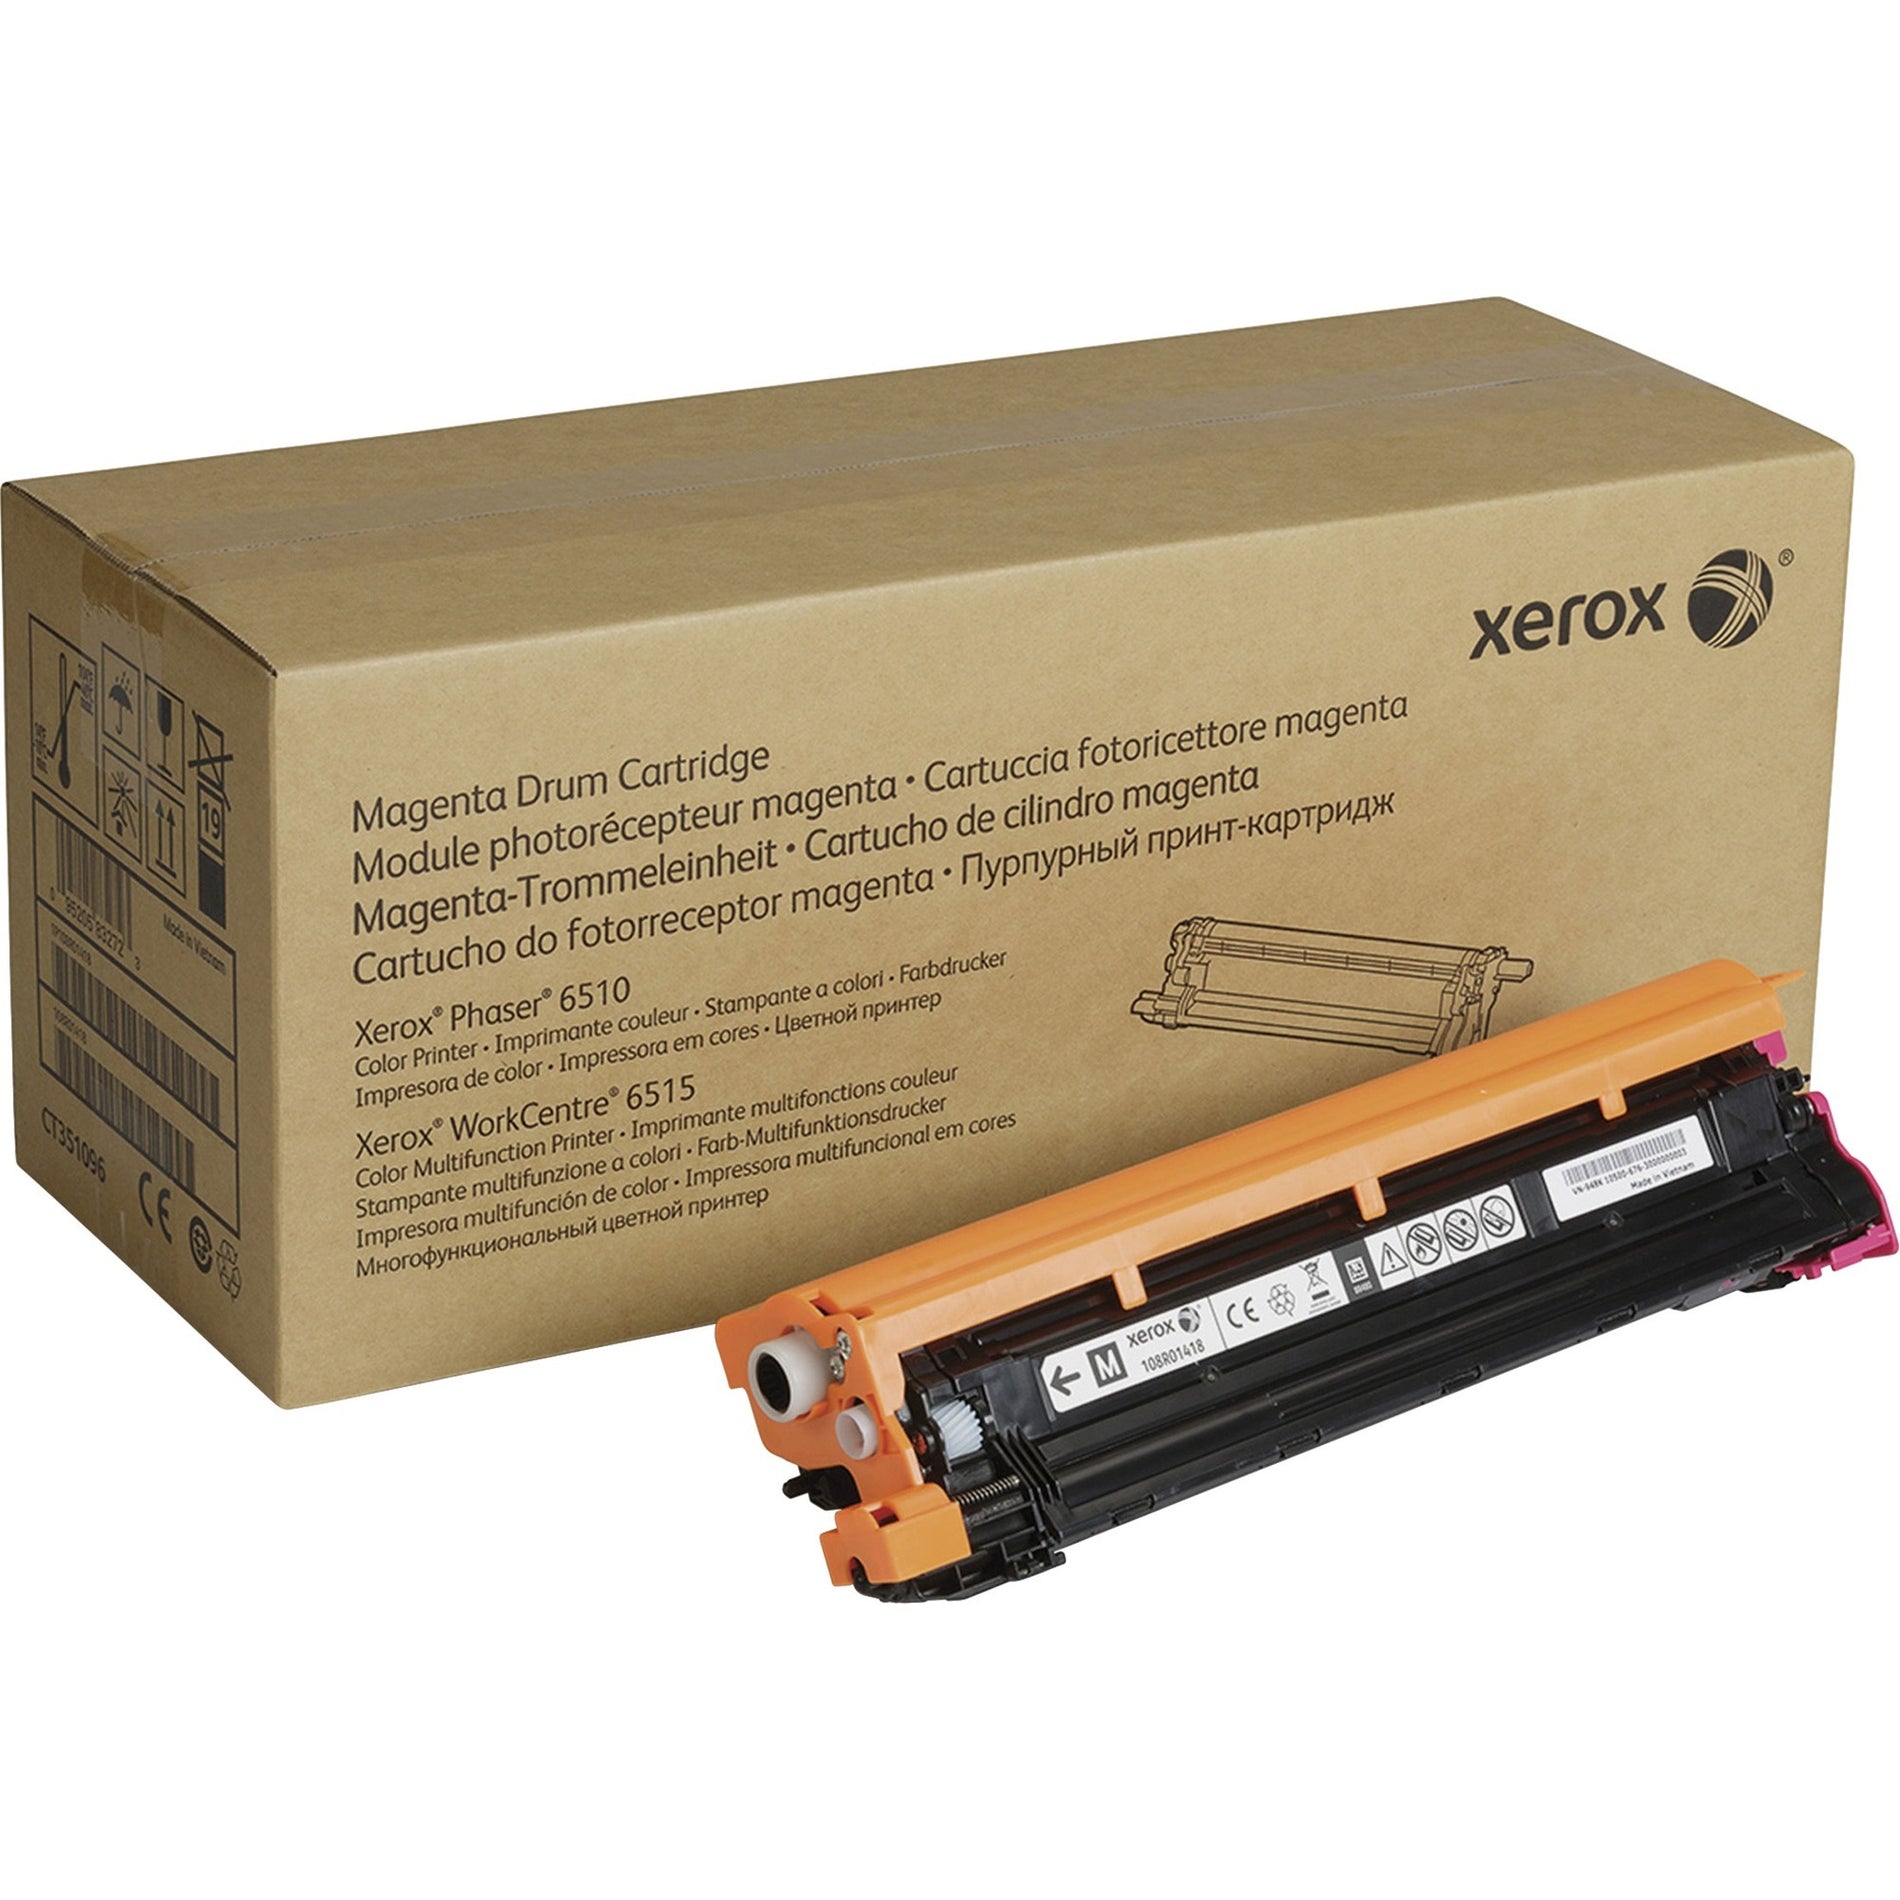 Xerox 108R01418 WC 6515/Phaser 6510 Drum Cartridge, Magenta, 48000 Page Yield